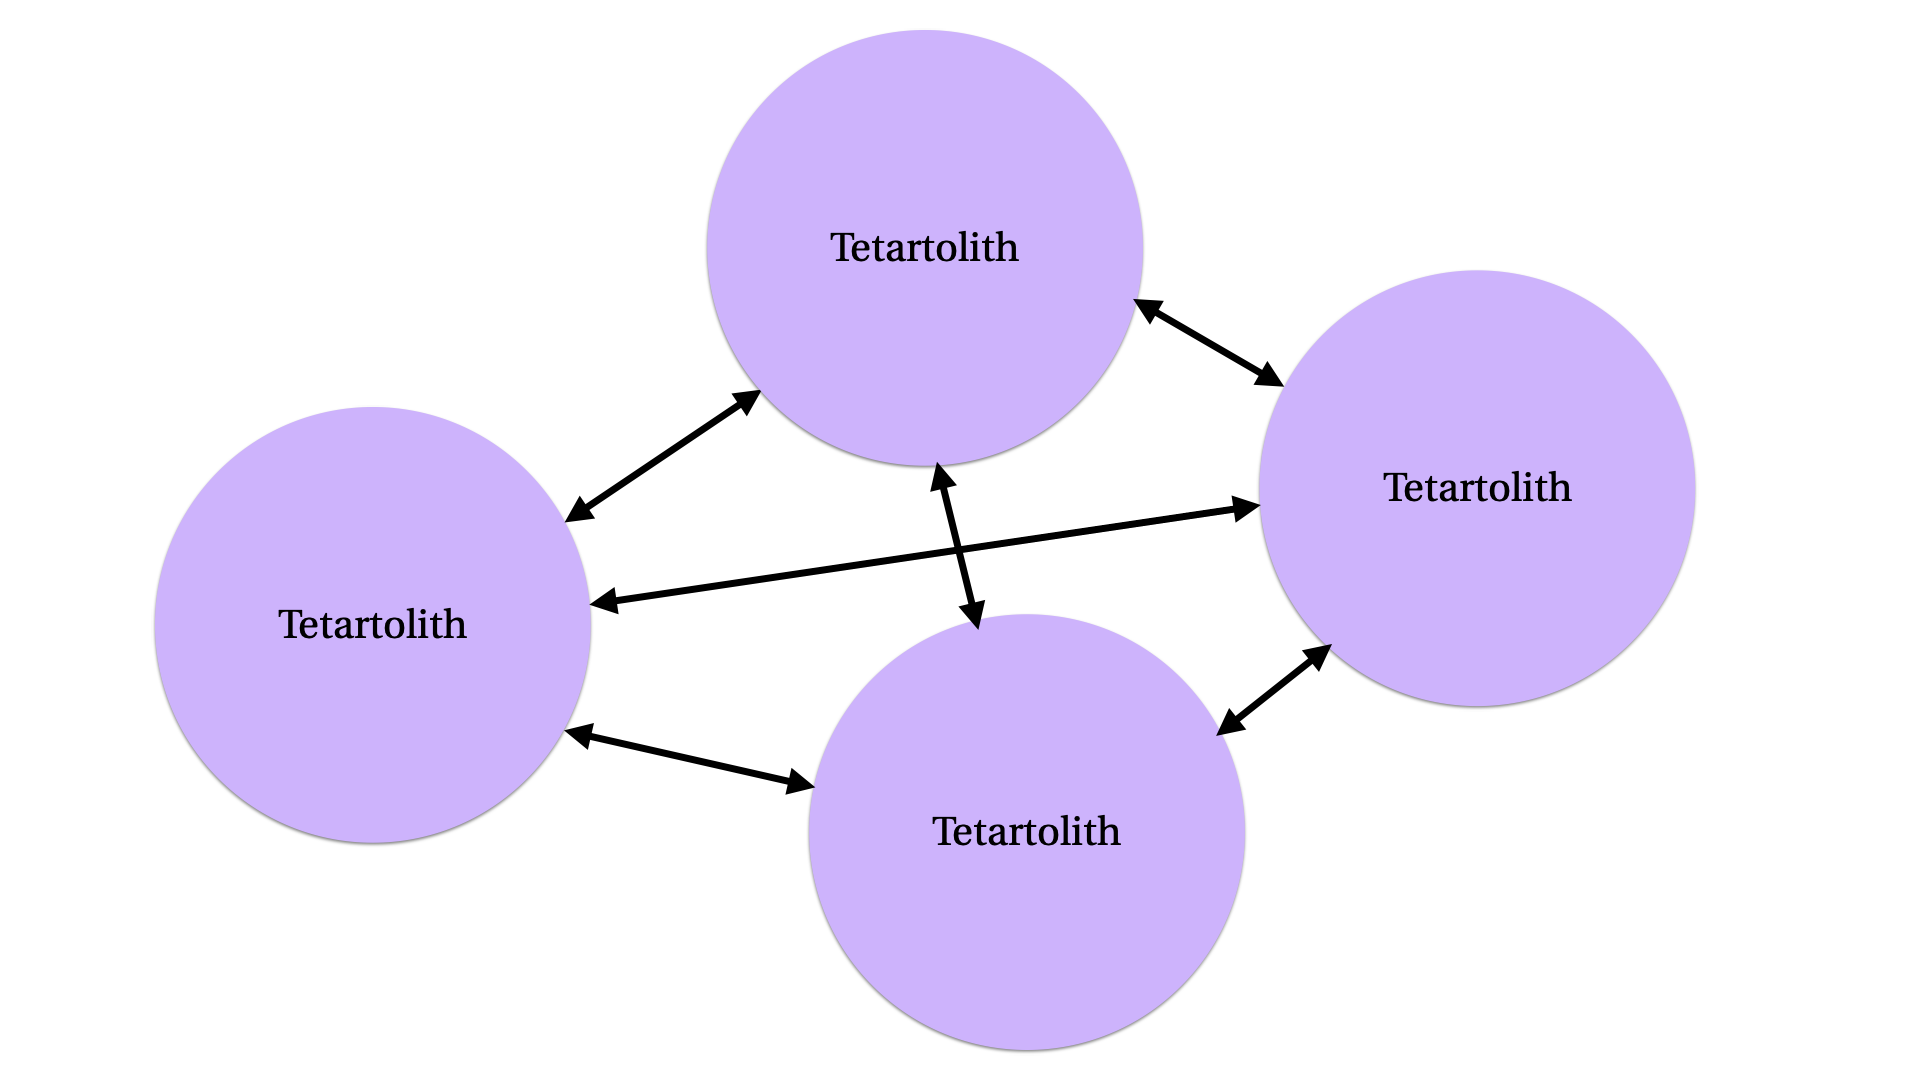 four circles with the word “tetartolith” on them and double-headed arrows connecting them all